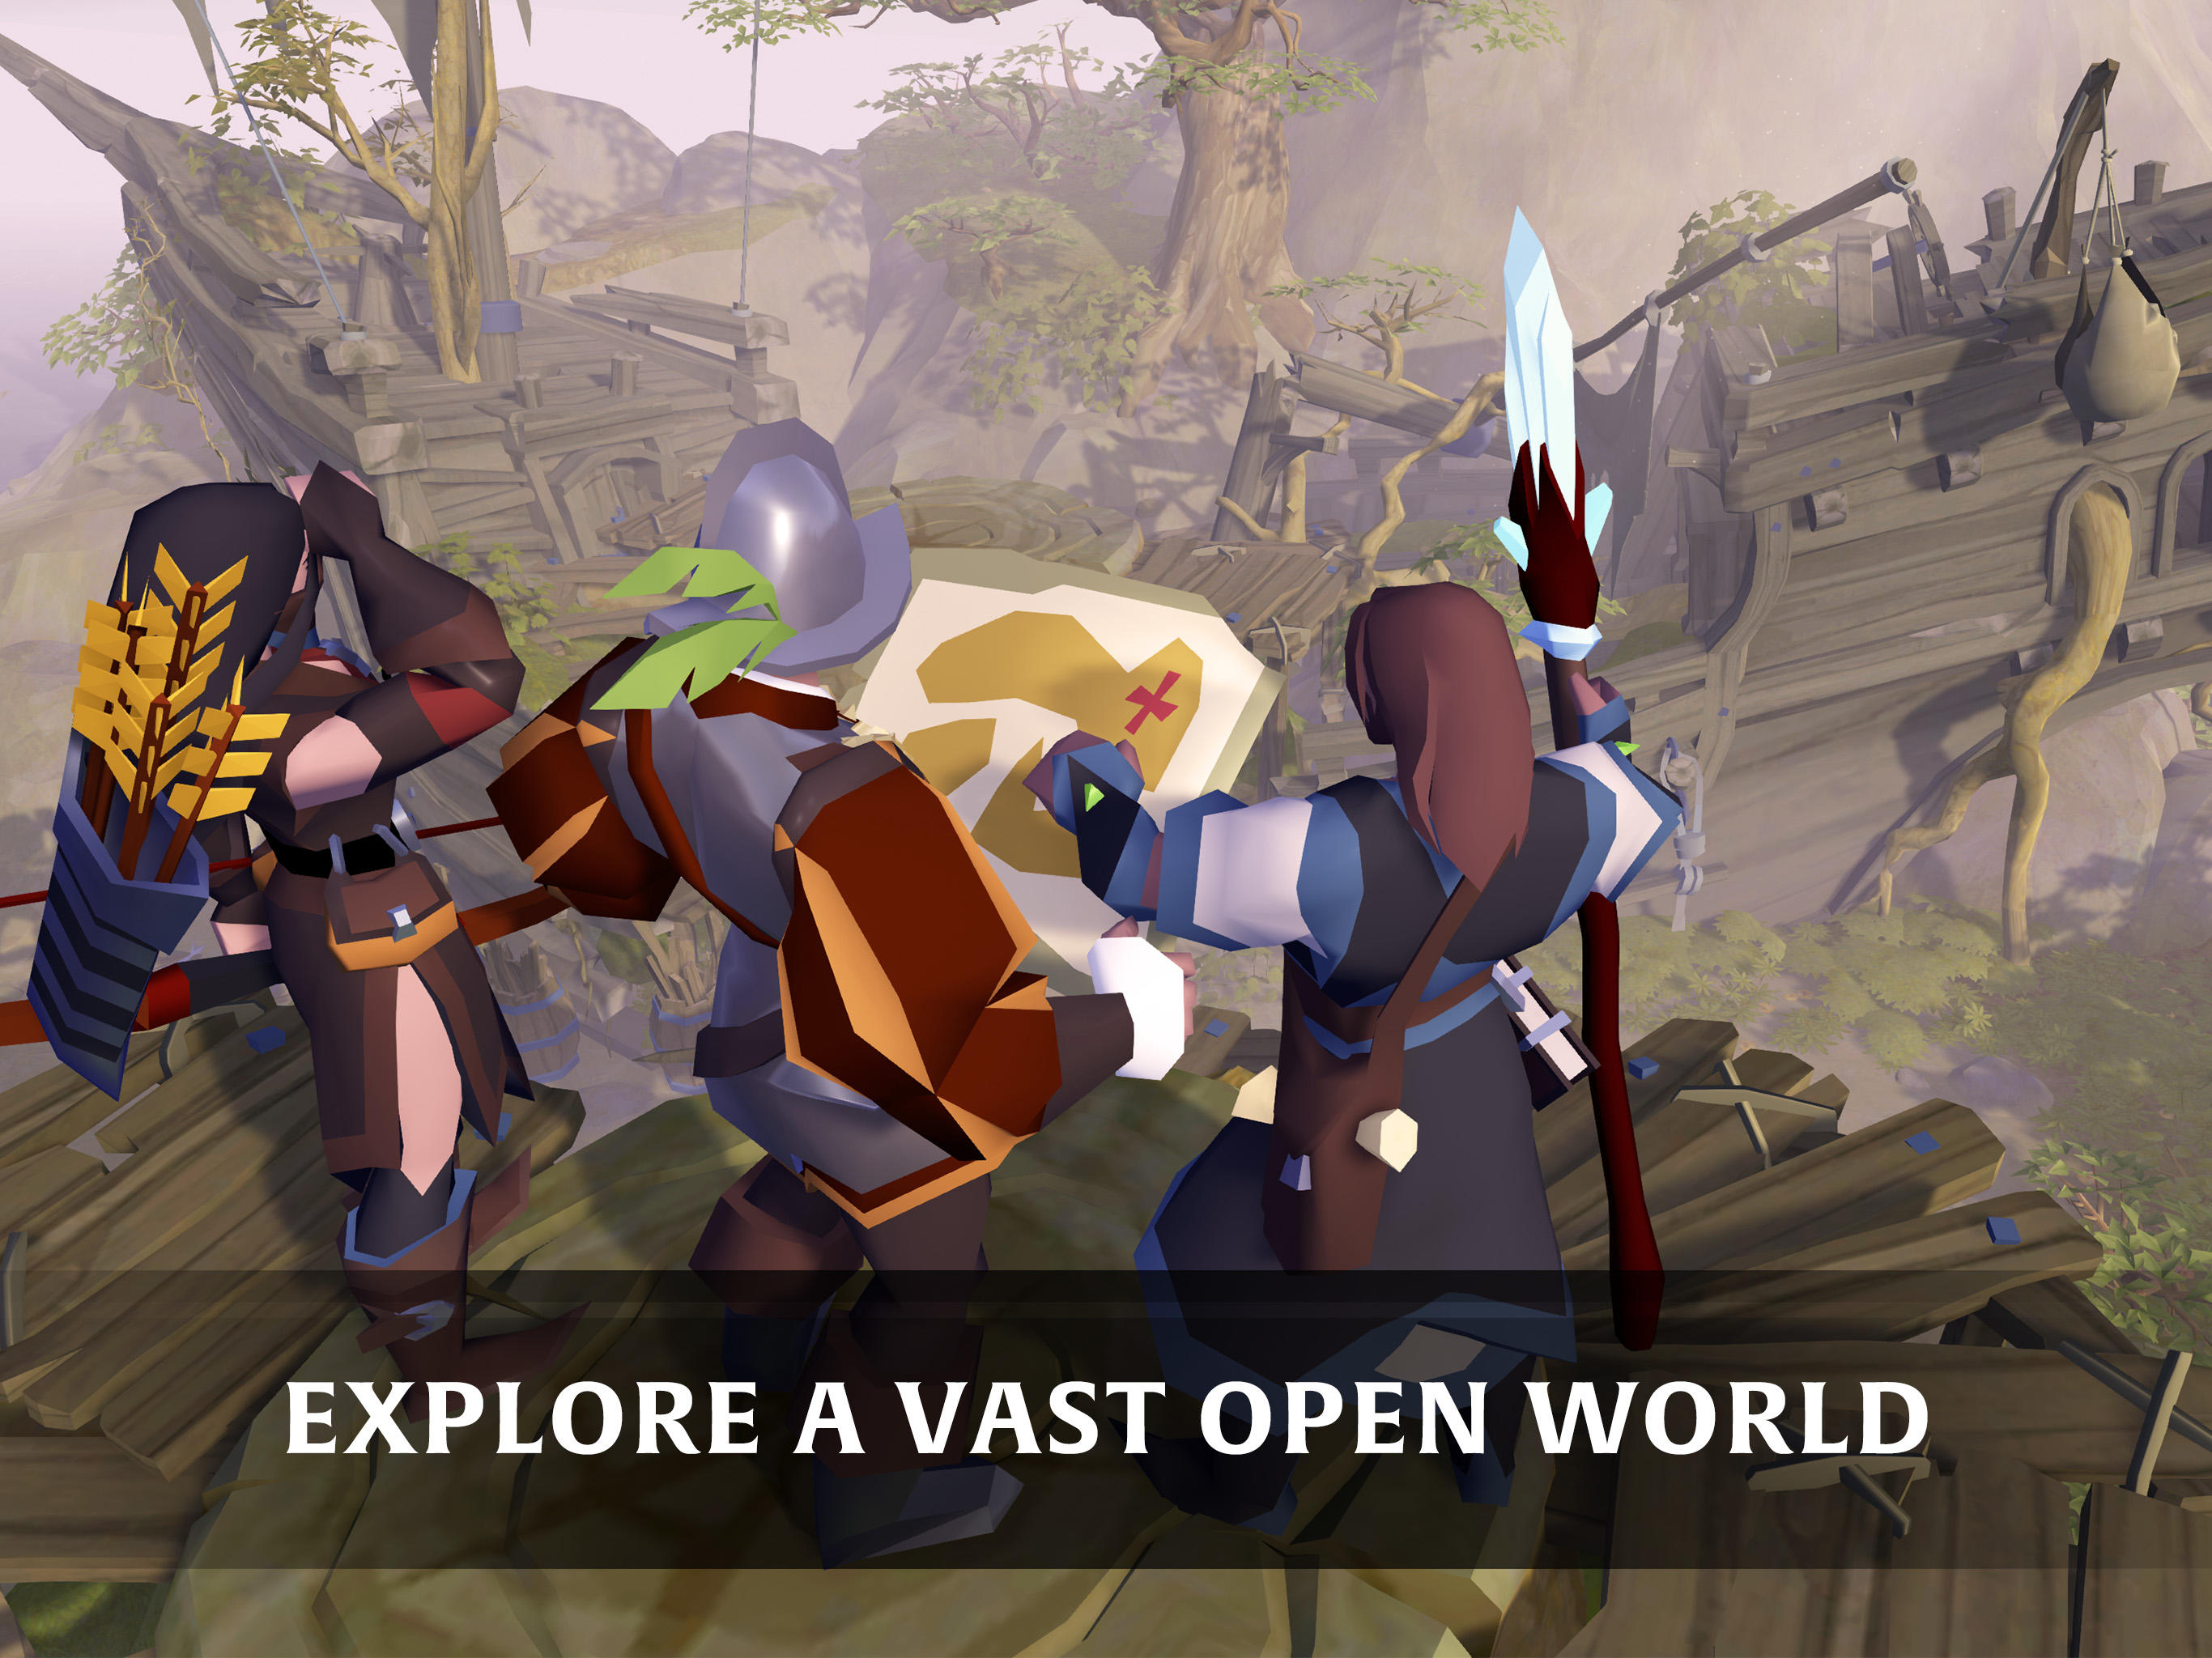 Albion Online Download APK for Android (Free)